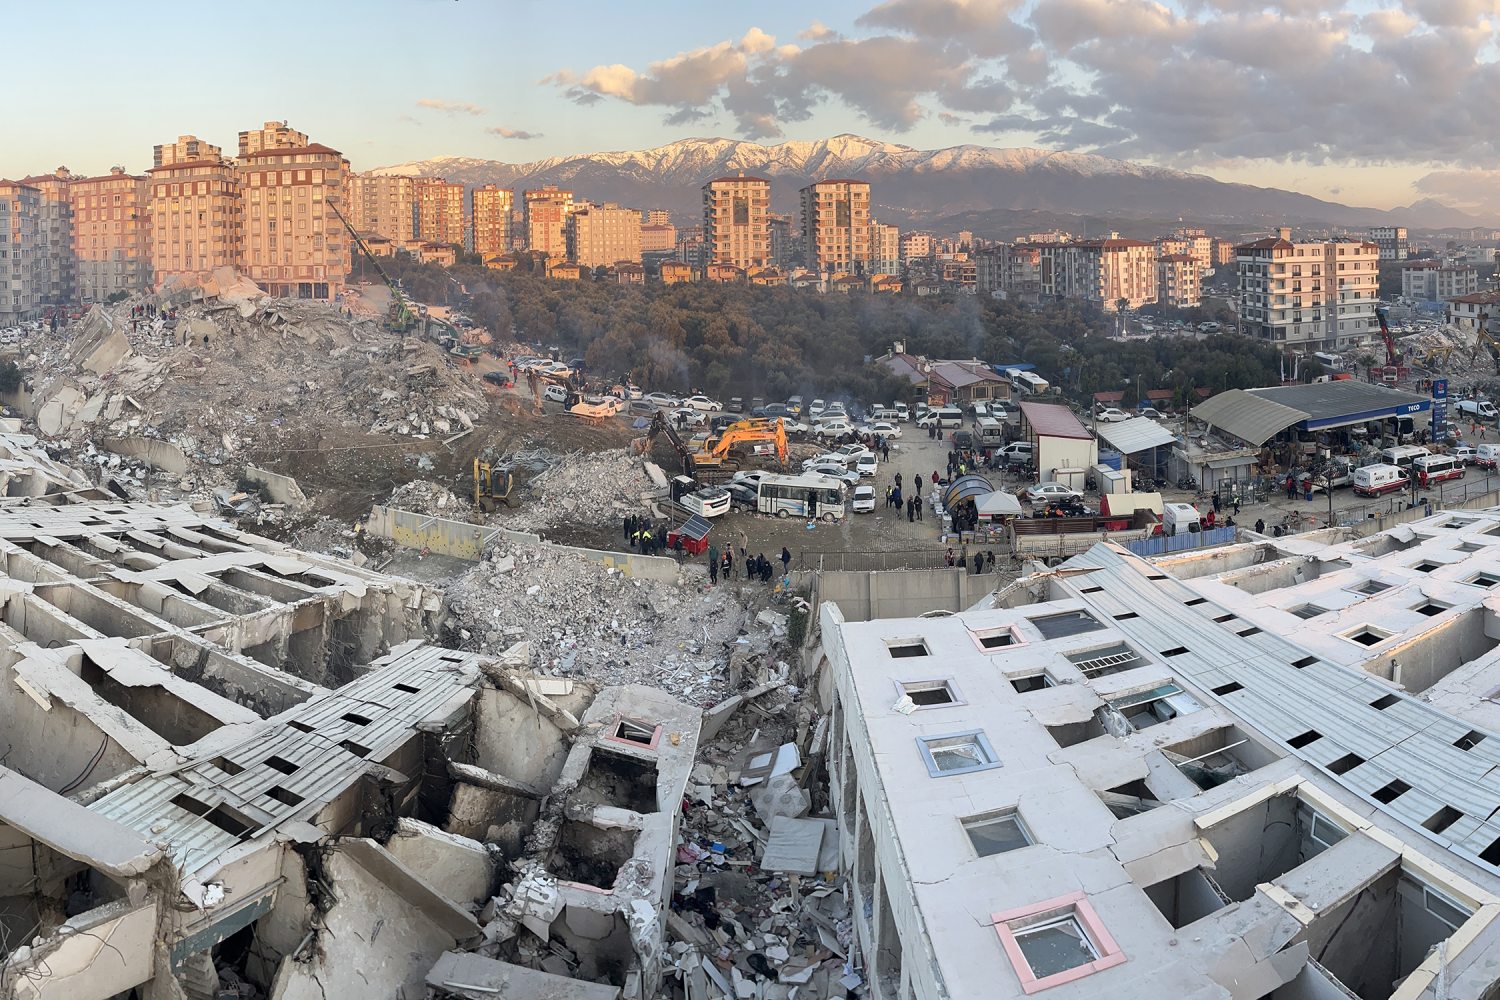 Scenery after the earthquake in Turkey